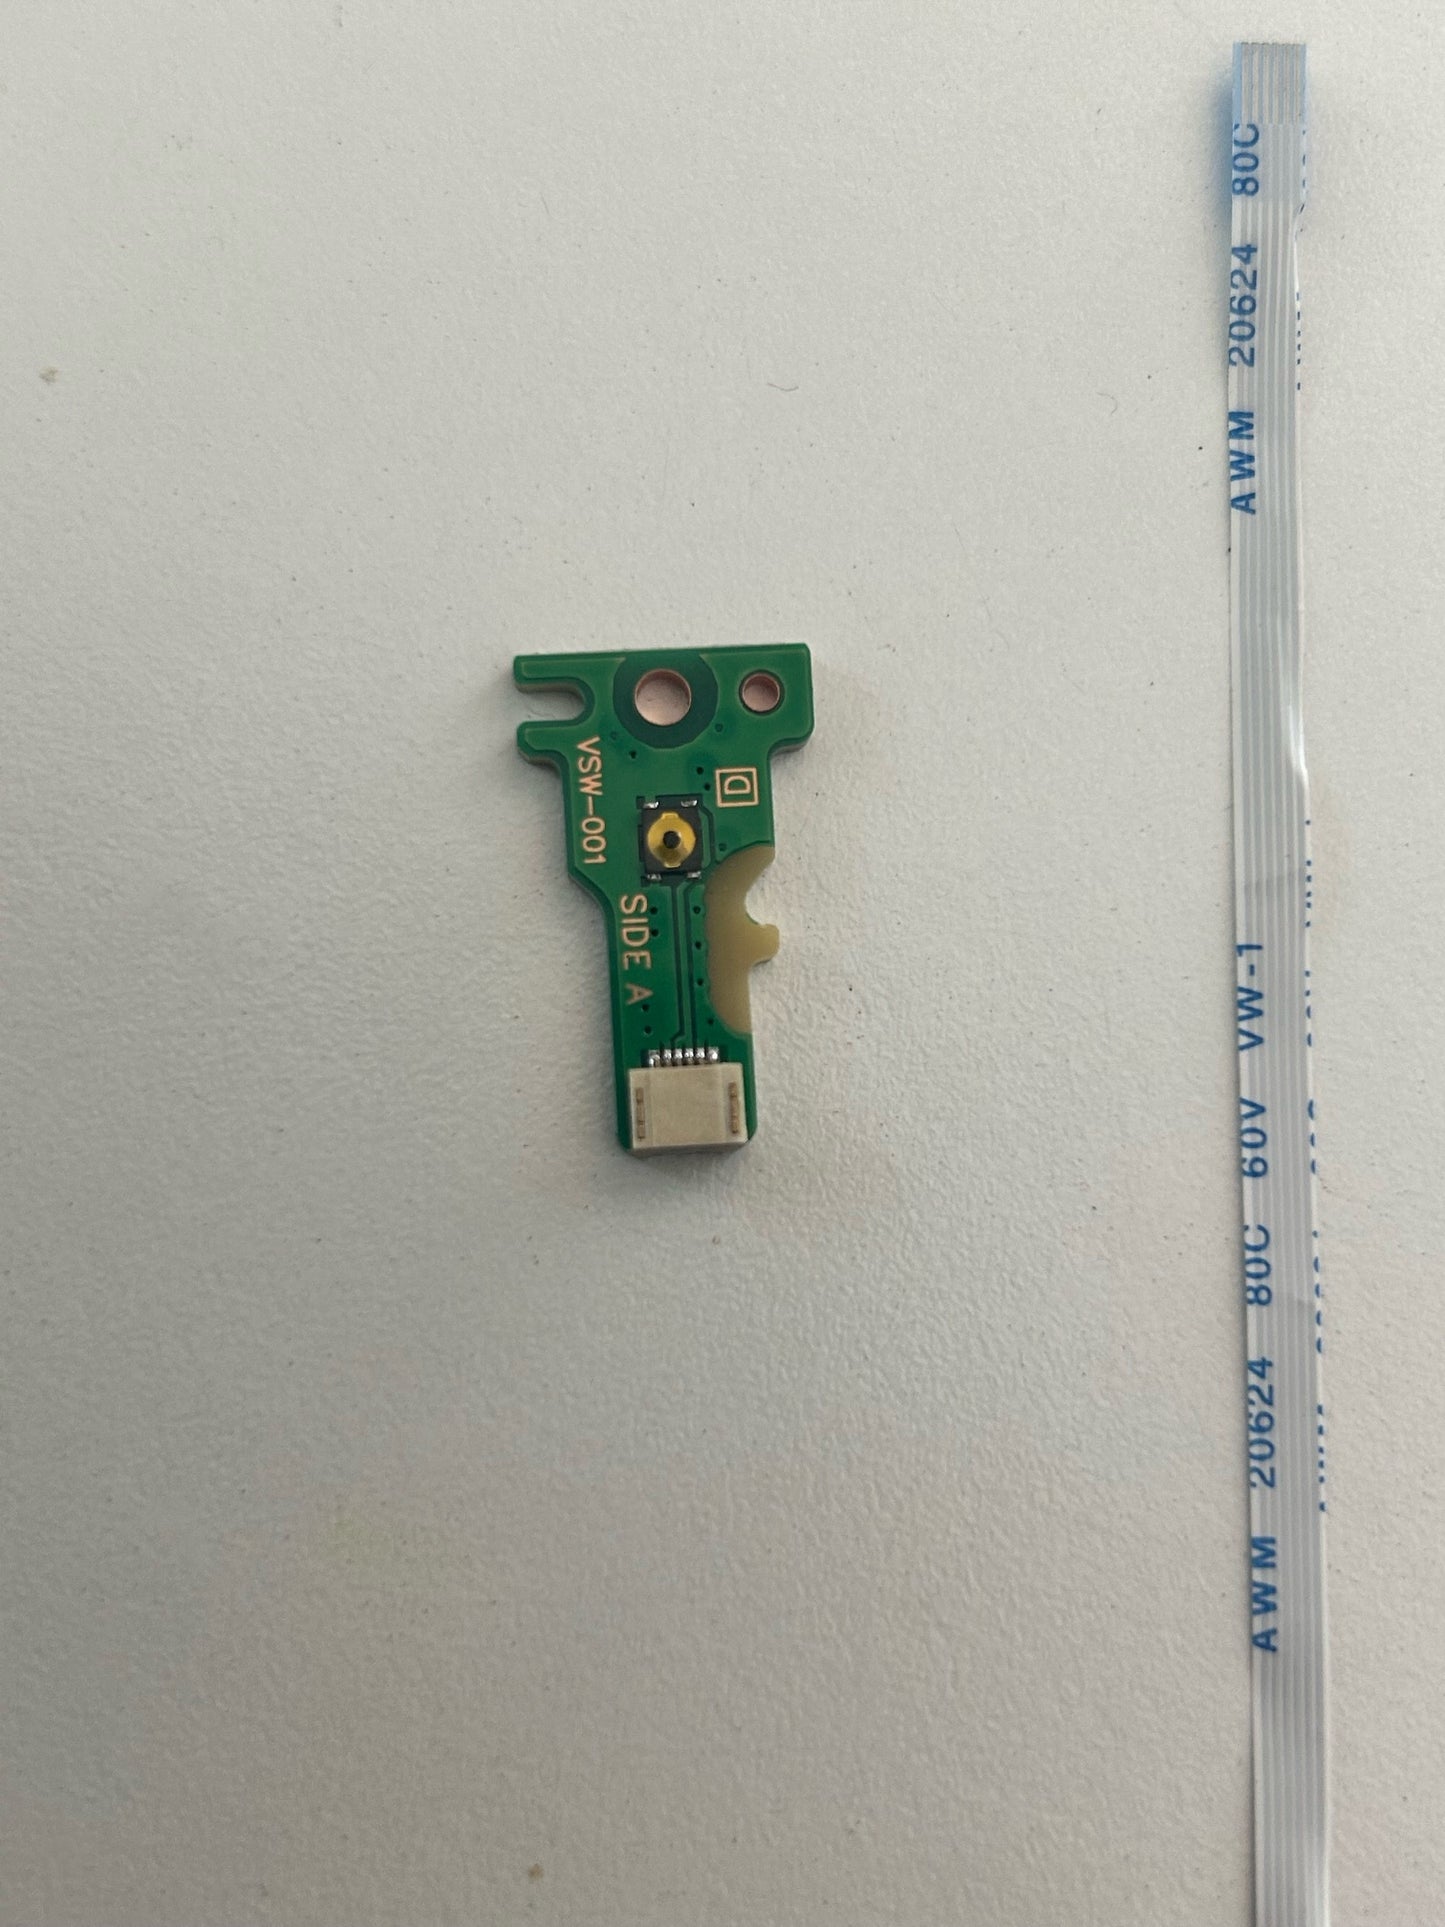 Ps4 Pro Power/Eject  Switch Board VSW-001 VSW-002 with Flex Cable